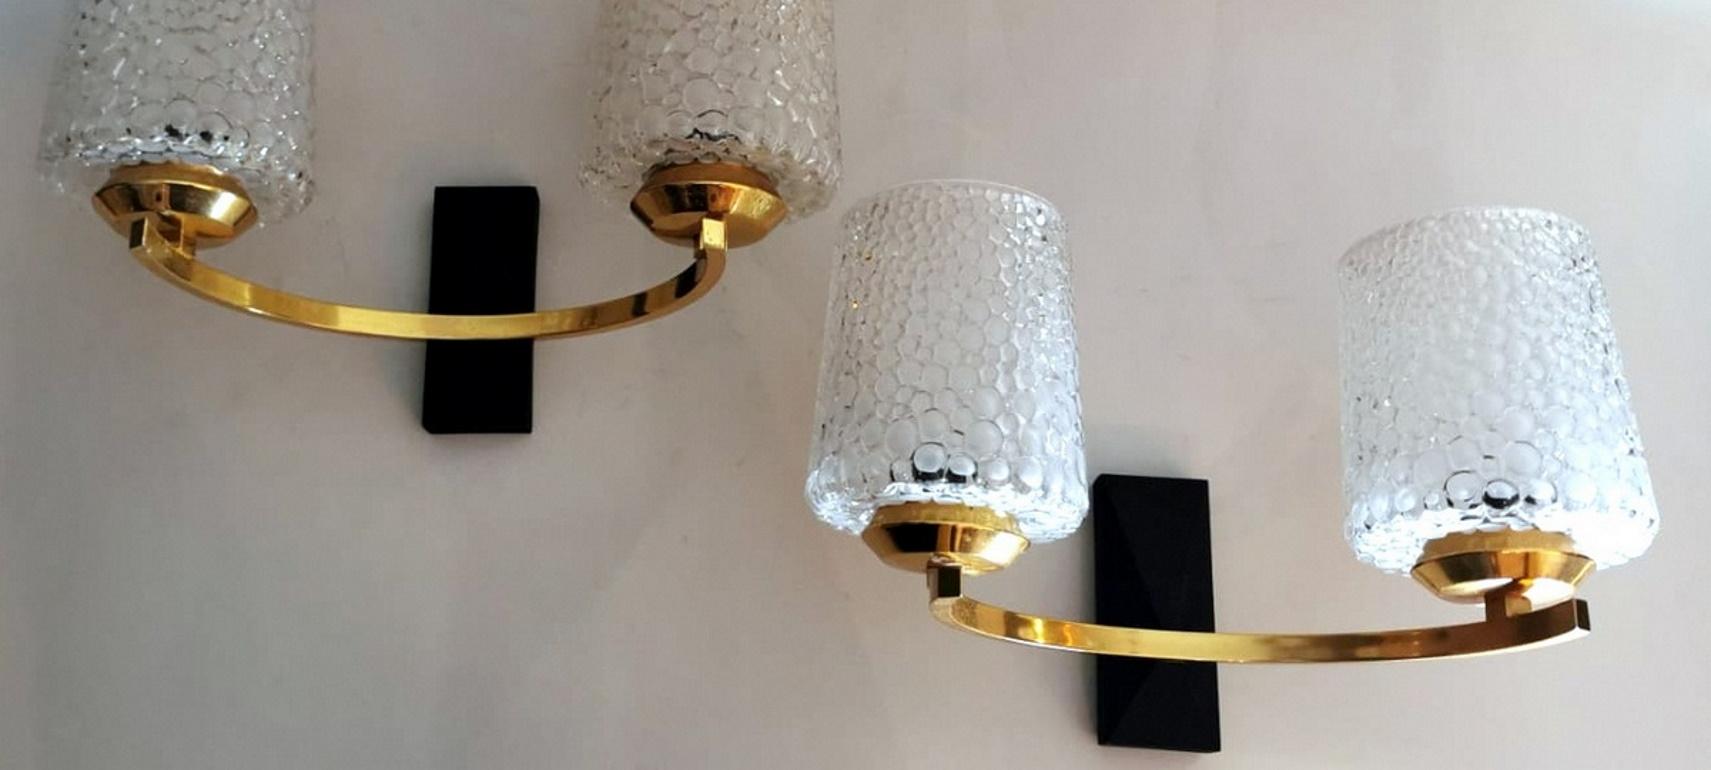 Arlus Maison Style Three Sconces in Brass and Half Crystal In Good Condition For Sale In Prato, Tuscany